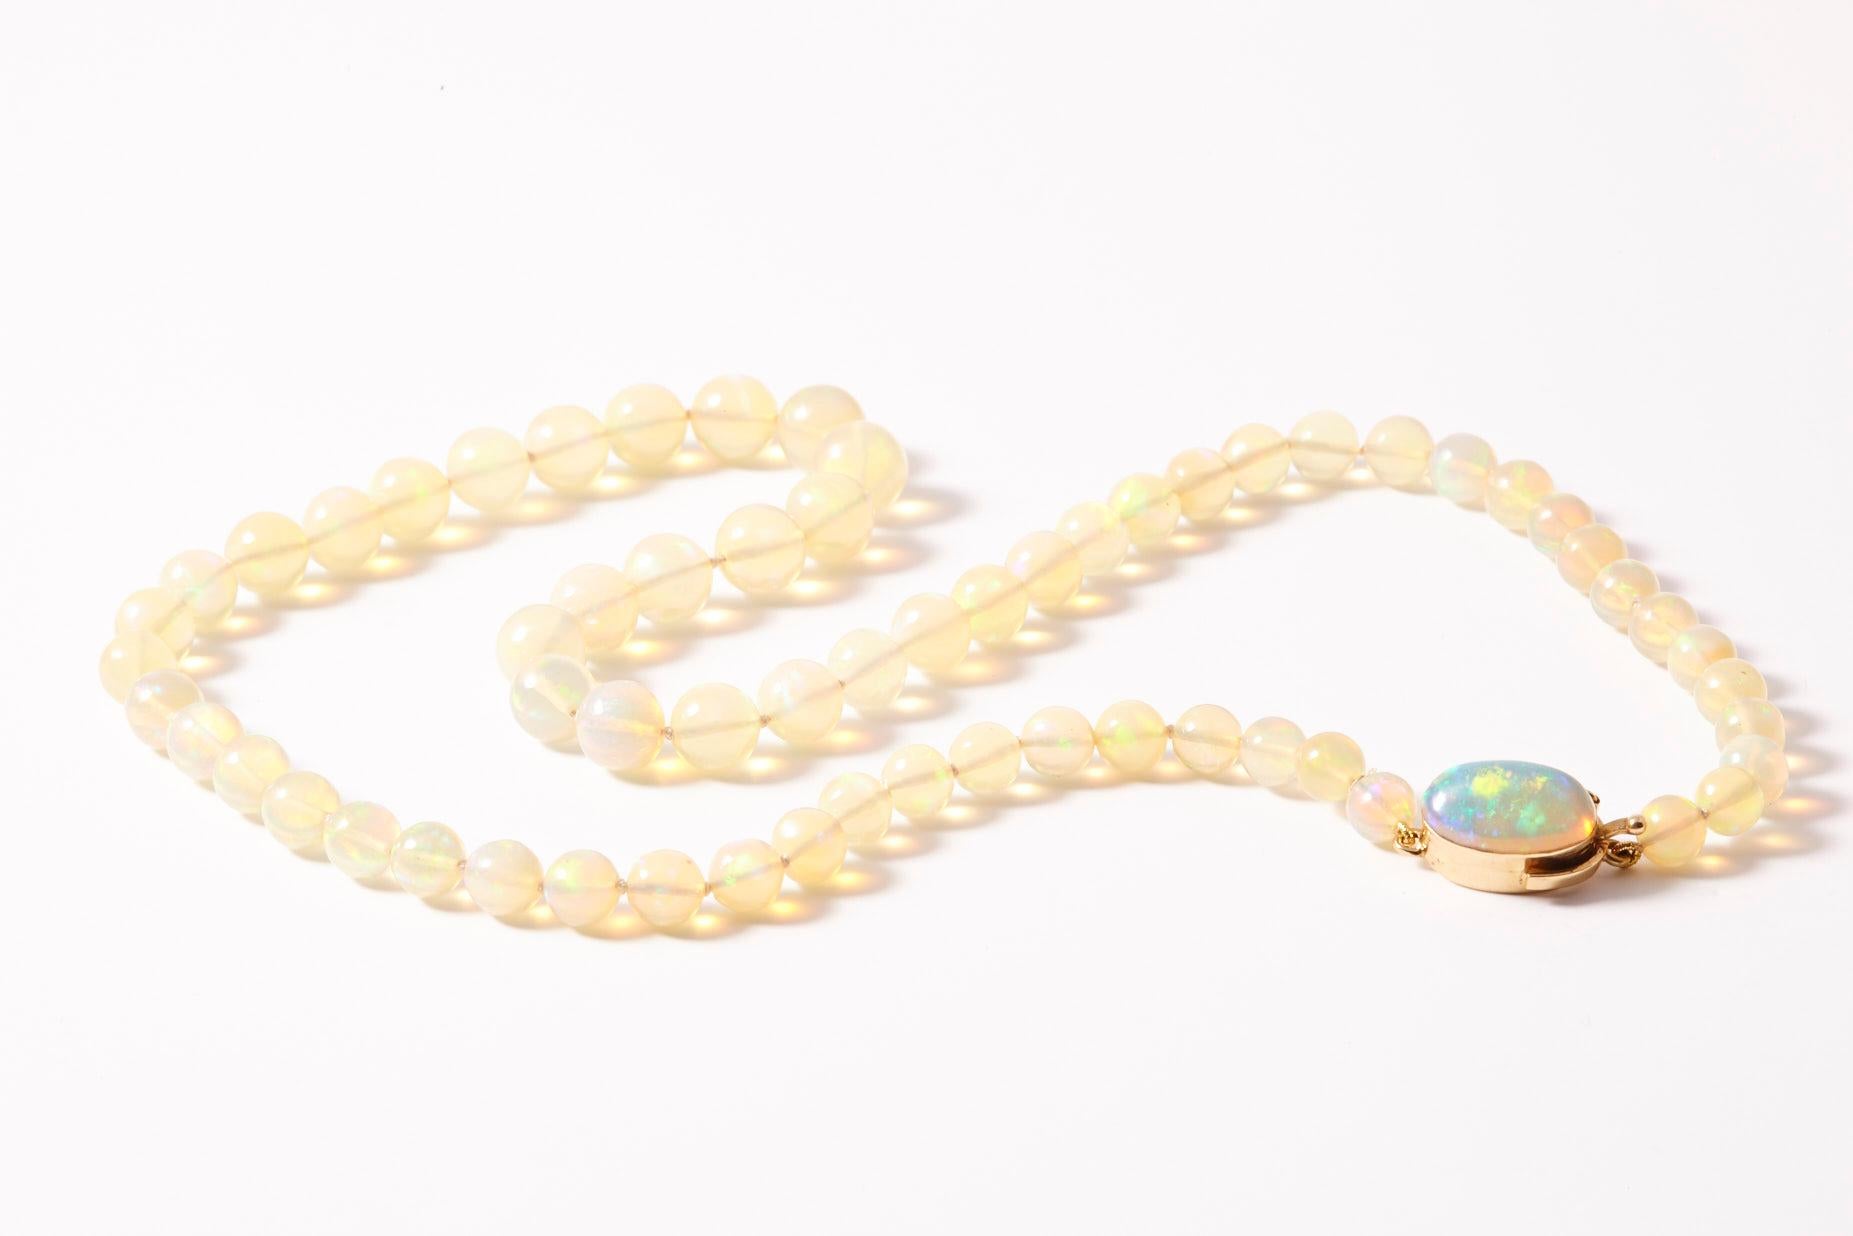 Vintage Jelly opal graduated bead necklace generations with matched cabochon clasp. This one of a kind vintage find is an estate piece with classical sensibilities. Individually knotted by hand with a silk cord and 18K clasp set with a matching